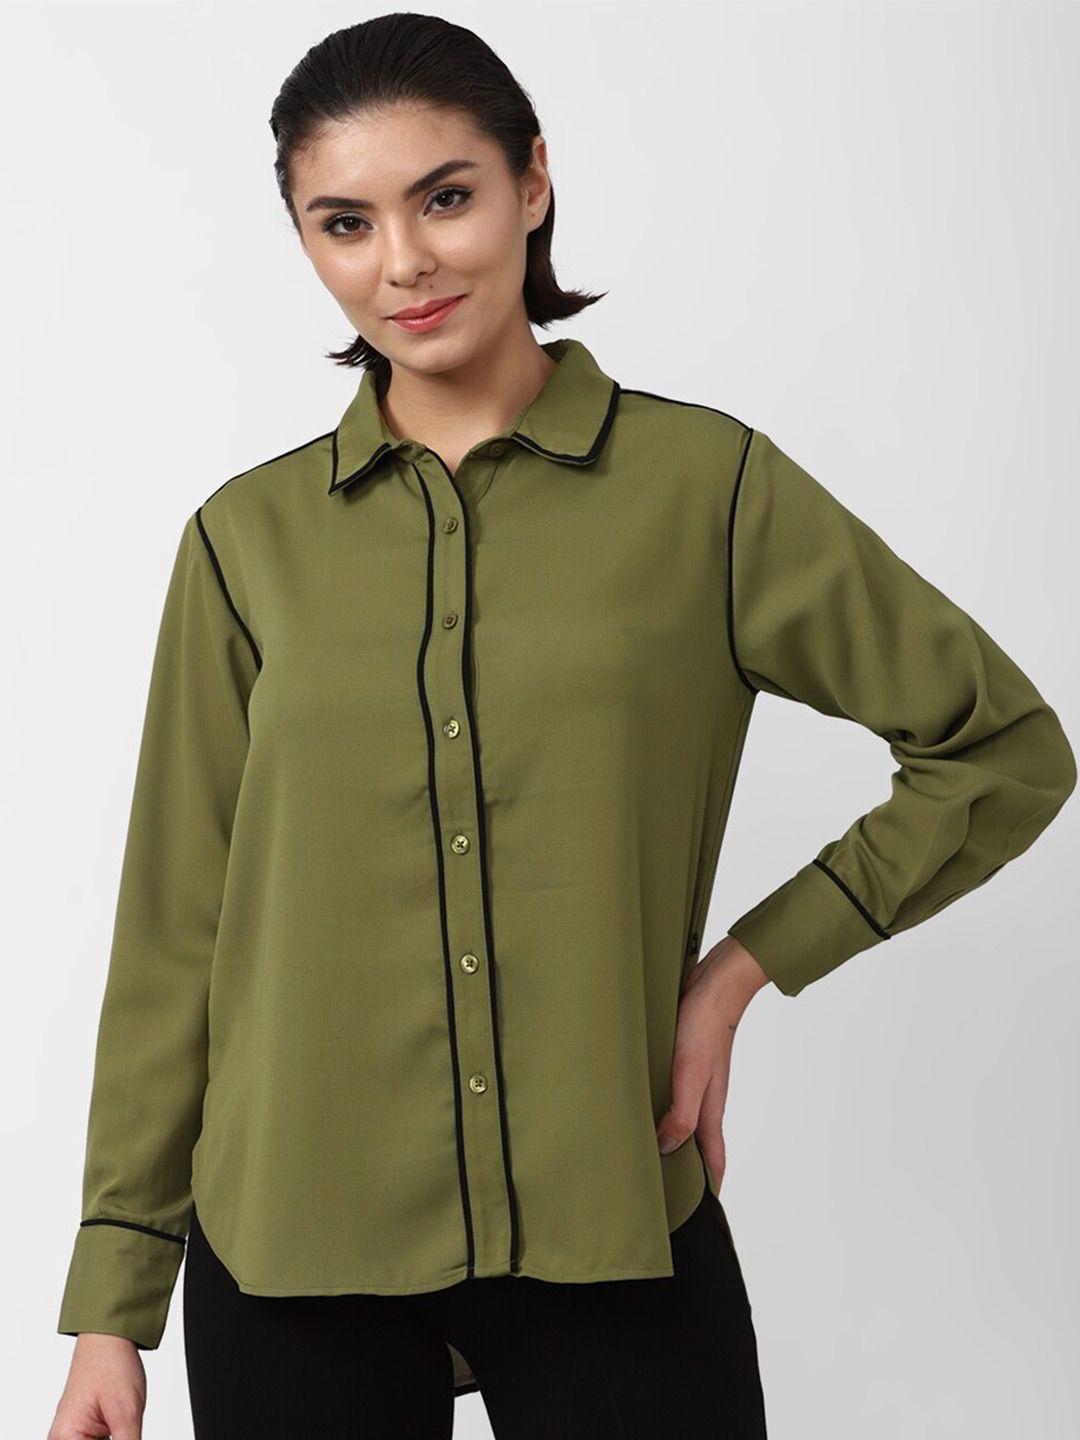 forever-21-women-olive-green-solid-casual-shirt